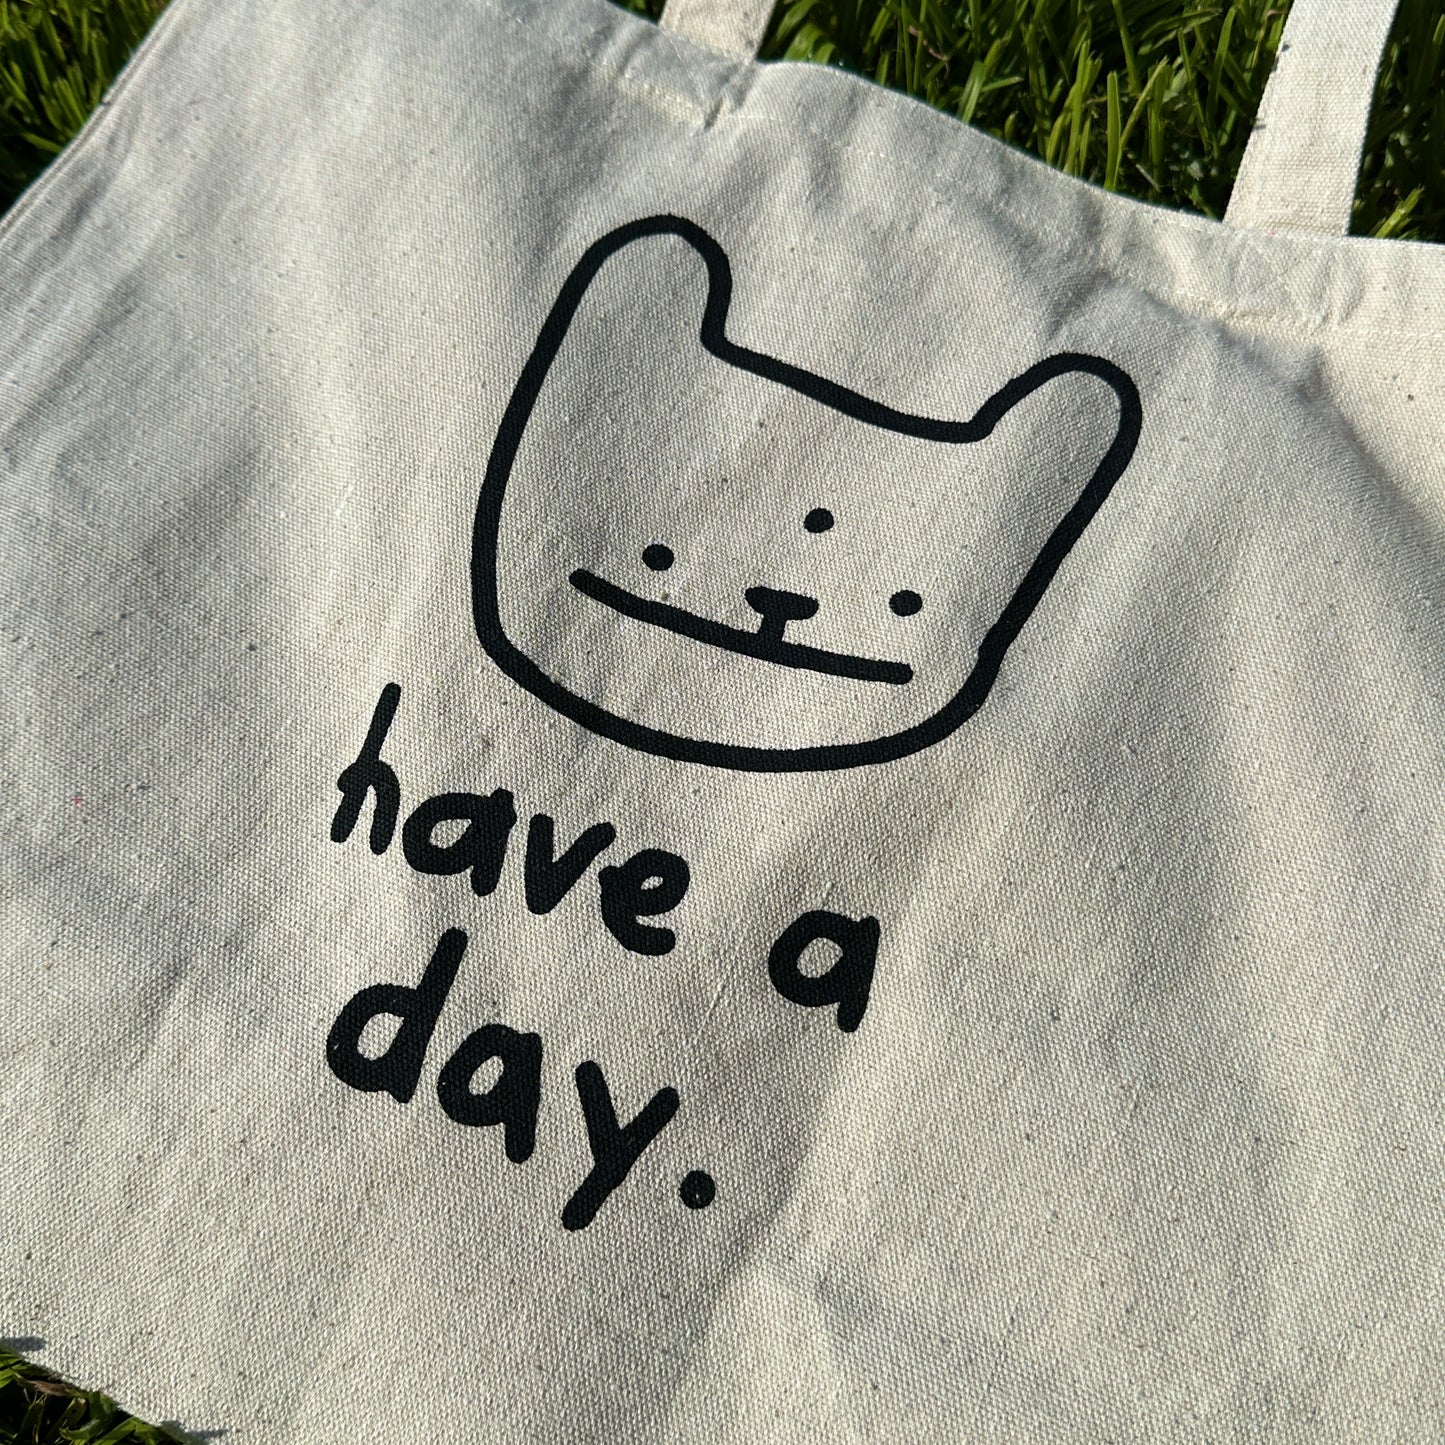 Have a Day Bag